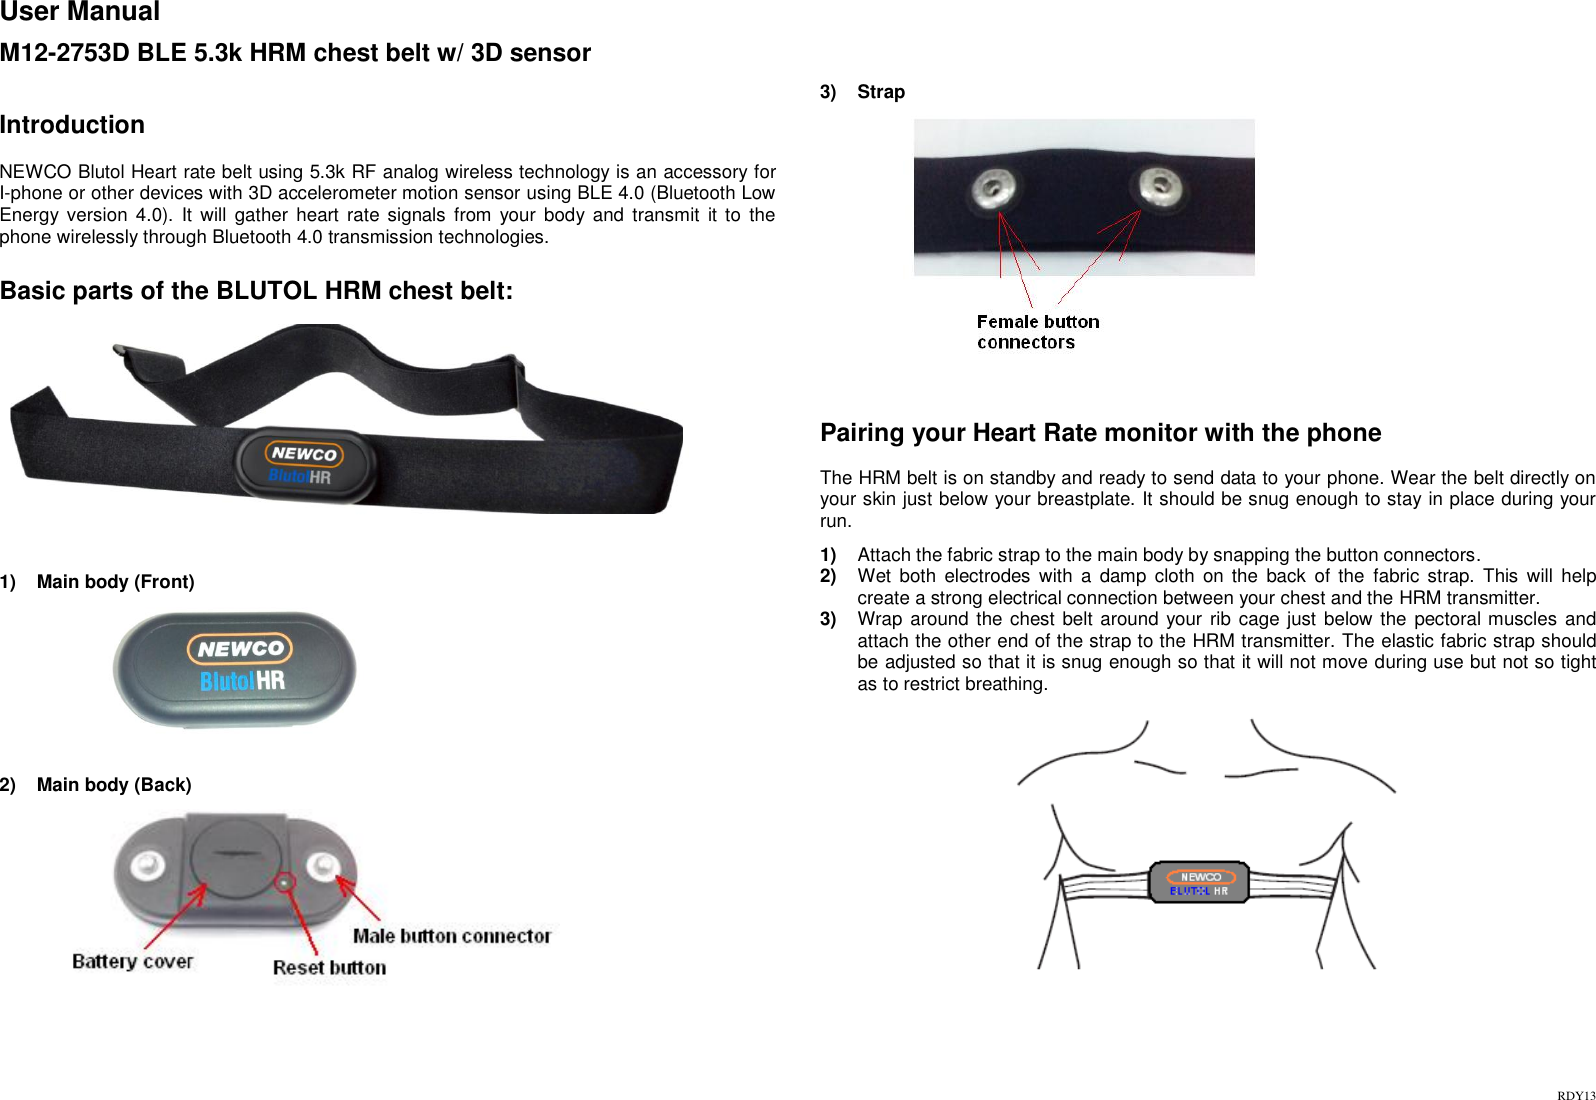 RDY13 User Manual  M12-2753D BLE 5.3k HRM chest belt w/ 3D sensor    Introduction  NEWCO Blutol Heart rate belt using 5.3k RF analog wireless technology is an accessory for I-phone or other devices with 3D accelerometer motion sensor using BLE 4.0 (Bluetooth Low Energy version  4.0).  It  will  gather  heart  rate  signals  from  your body and  transmit  it to  the phone wirelessly through Bluetooth 4.0 transmission technologies.   Basic parts of the BLUTOL HRM chest belt:    1)  Main body (Front)                    2)  Main body (Back)                   3)  Strap                 Pairing your Heart Rate monitor with the phone  The HRM belt is on standby and ready to send data to your phone. Wear the belt directly on your skin just below your breastplate. It should be snug enough to stay in place during your run.   1) Attach the fabric strap to the main body by snapping the button connectors.  2) Wet  both  electrodes  with  a  damp  cloth  on the  back  of  the  fabric  strap.  This  will  help create a strong electrical connection between your chest and the HRM transmitter. 3) Wrap  around the chest belt around your rib cage just below the pectoral muscles and attach the other end of the strap to the HRM transmitter. The elastic fabric strap should be adjusted so that it is snug enough so that it will not move during use but not so tight as to restrict breathing.      